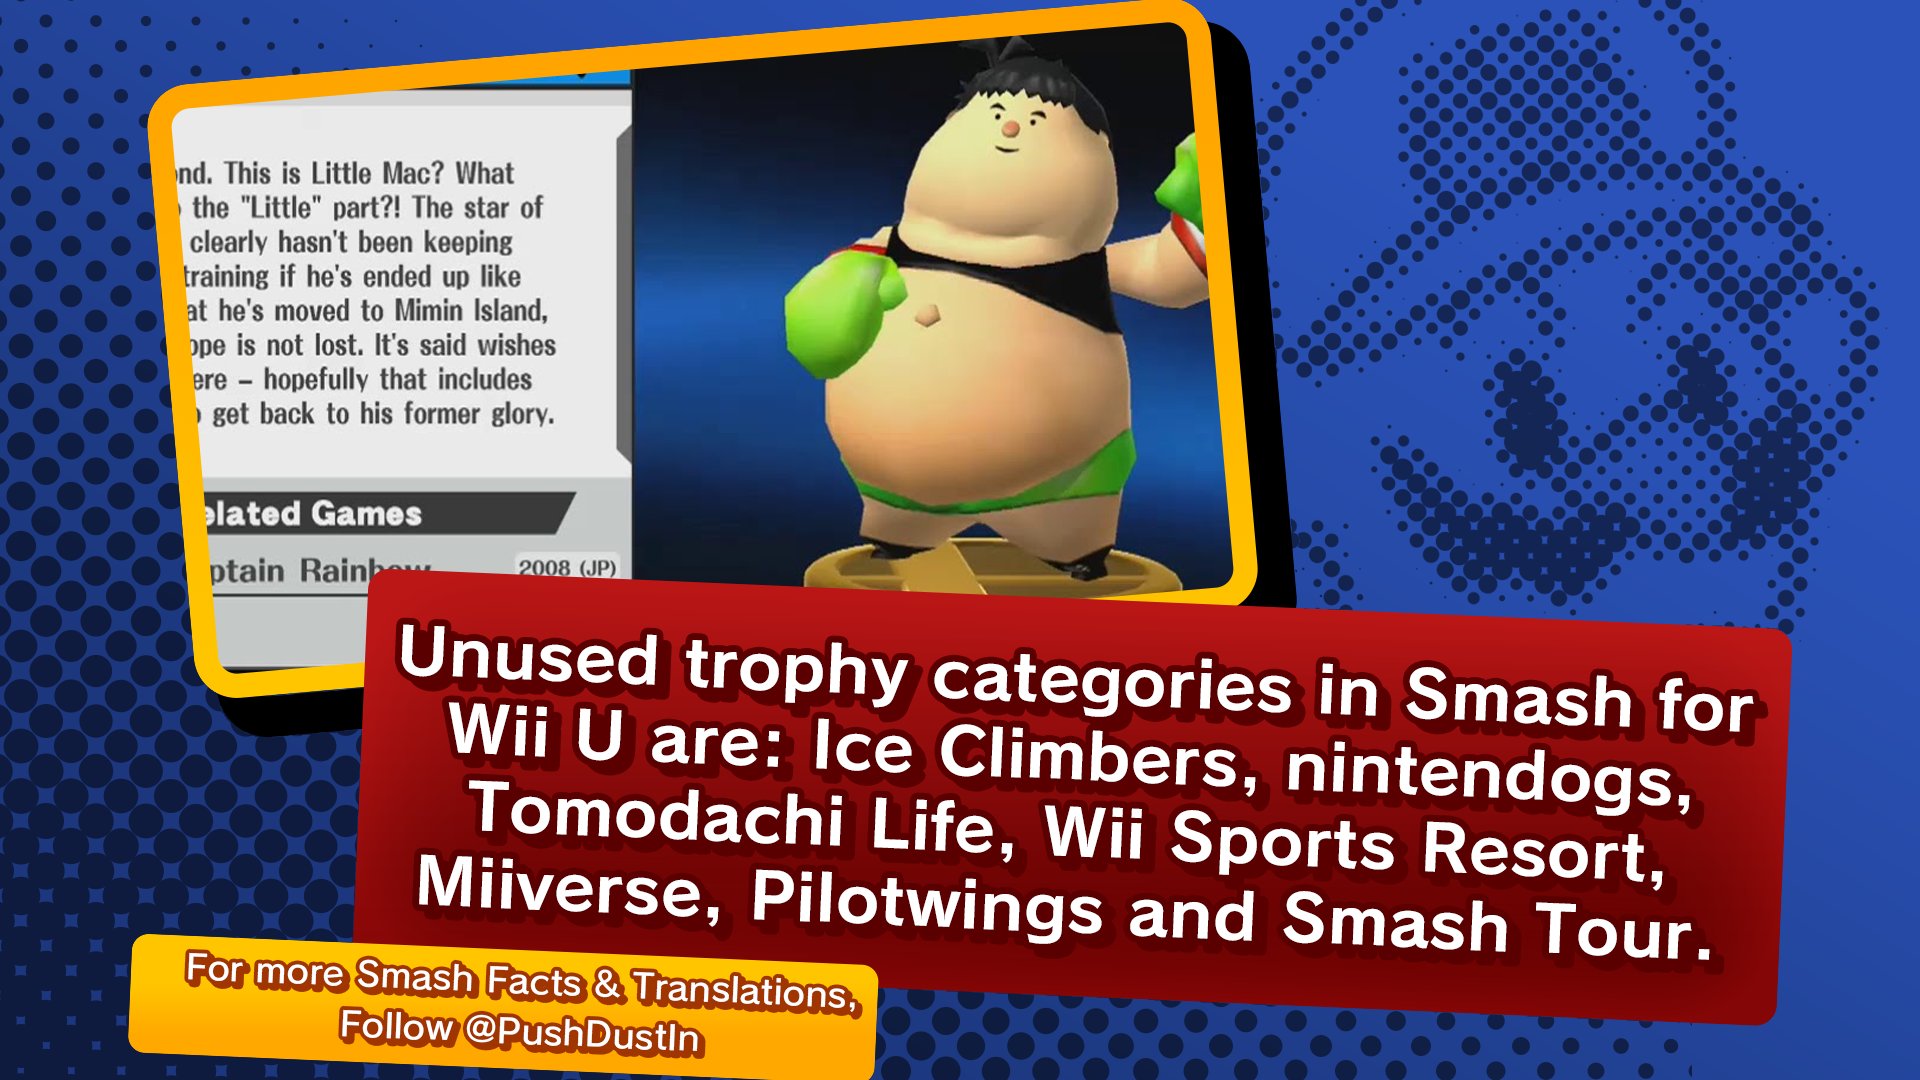 Pushdustin Unused Trophy Categories In Smash For Wii U Are Ice Climbers Nintendogs Tomodachi Life Wii Sports Resort Miiverse Pilotwings And Smash Tour Smashbros Nintendo Pushfacts T Co Rh9drhxvnx